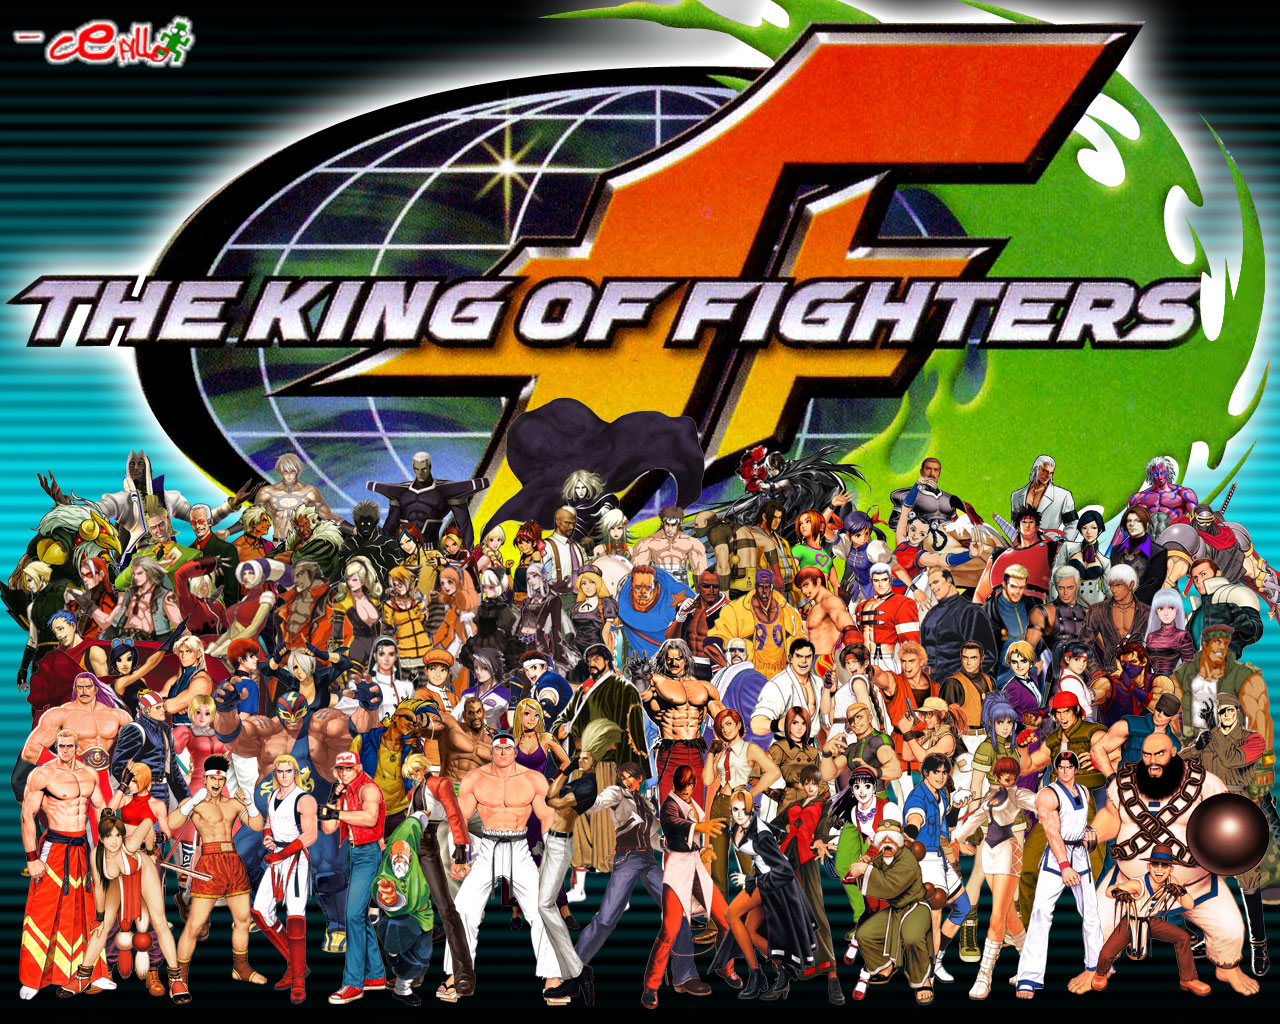 The King Of Fighters Wallpapers - WallpaperSafari